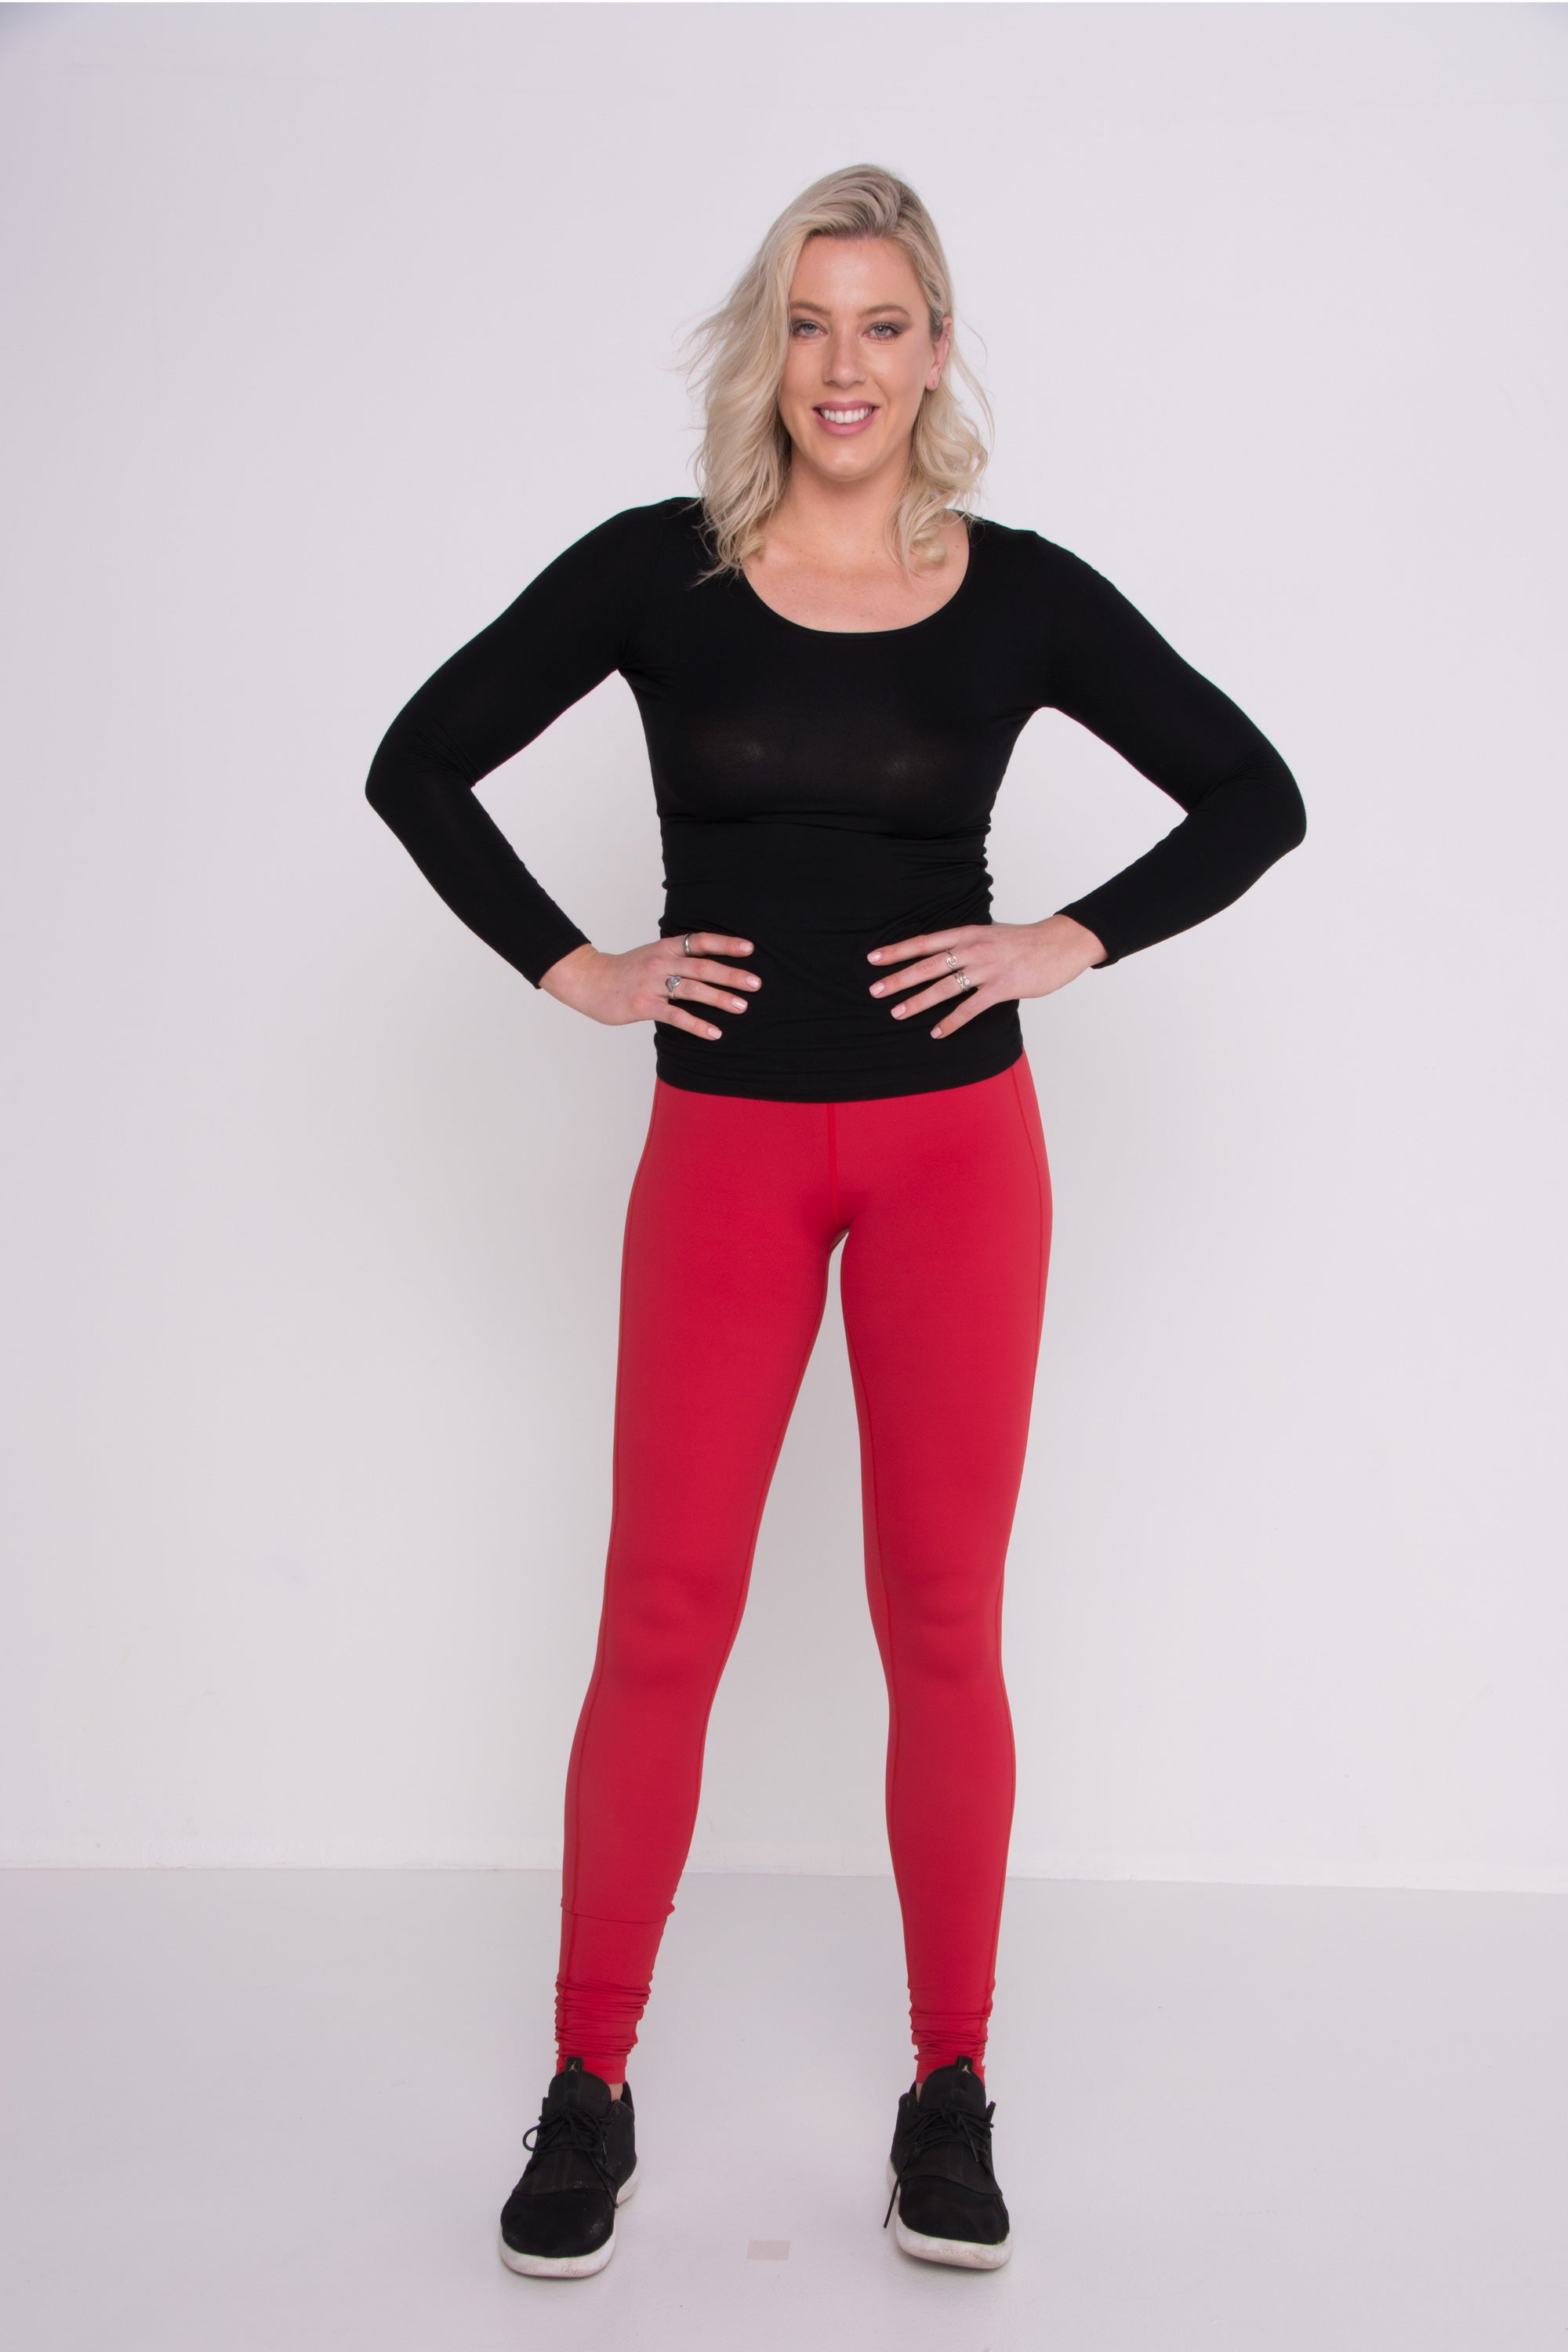 How To Style Red Leggings